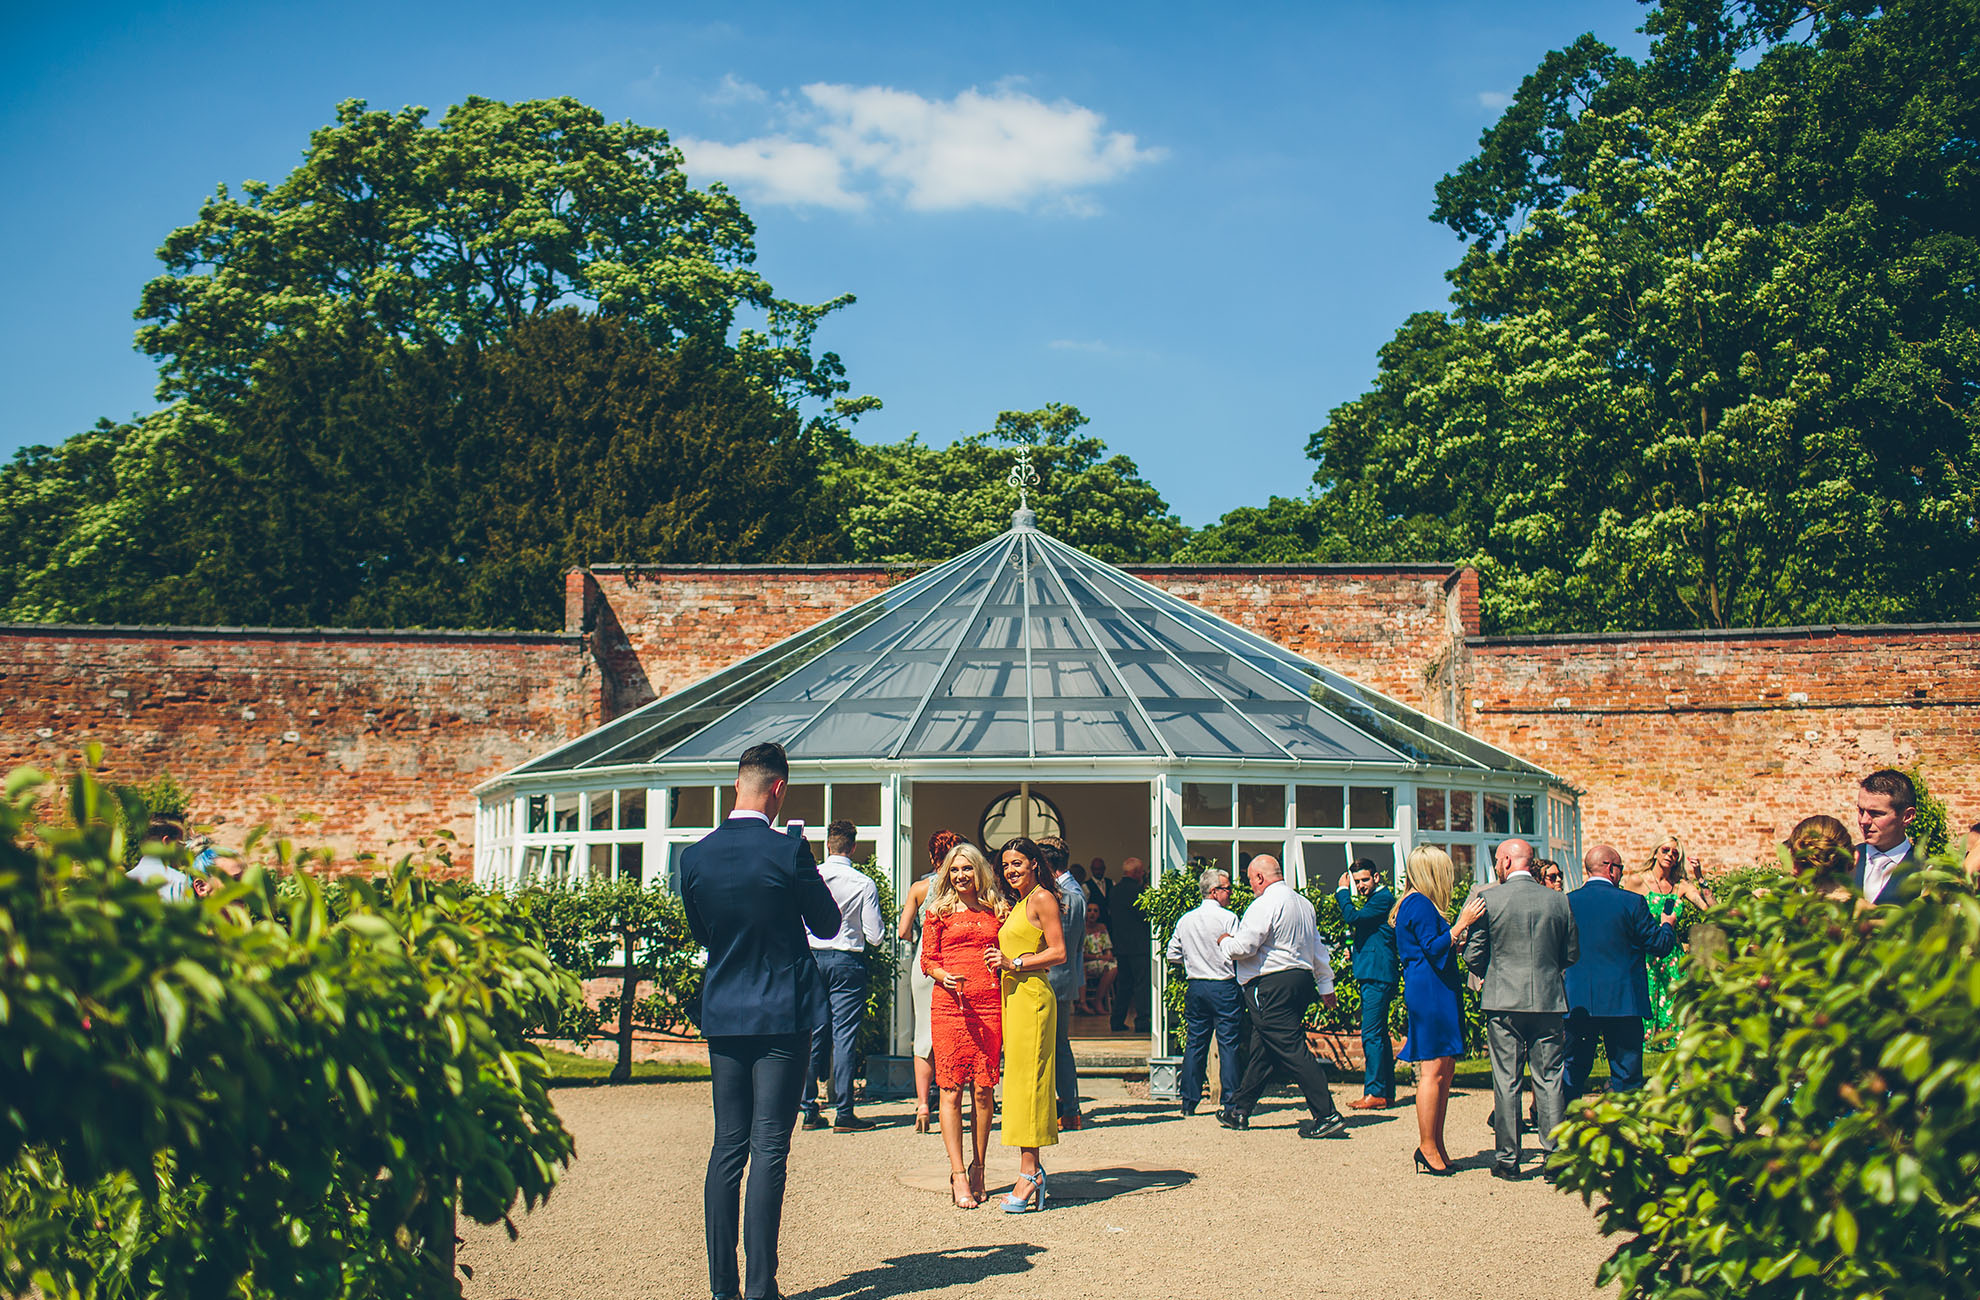 At this Cheshire wedding venue guests enjoy a drinks reception outside the Glasshouse